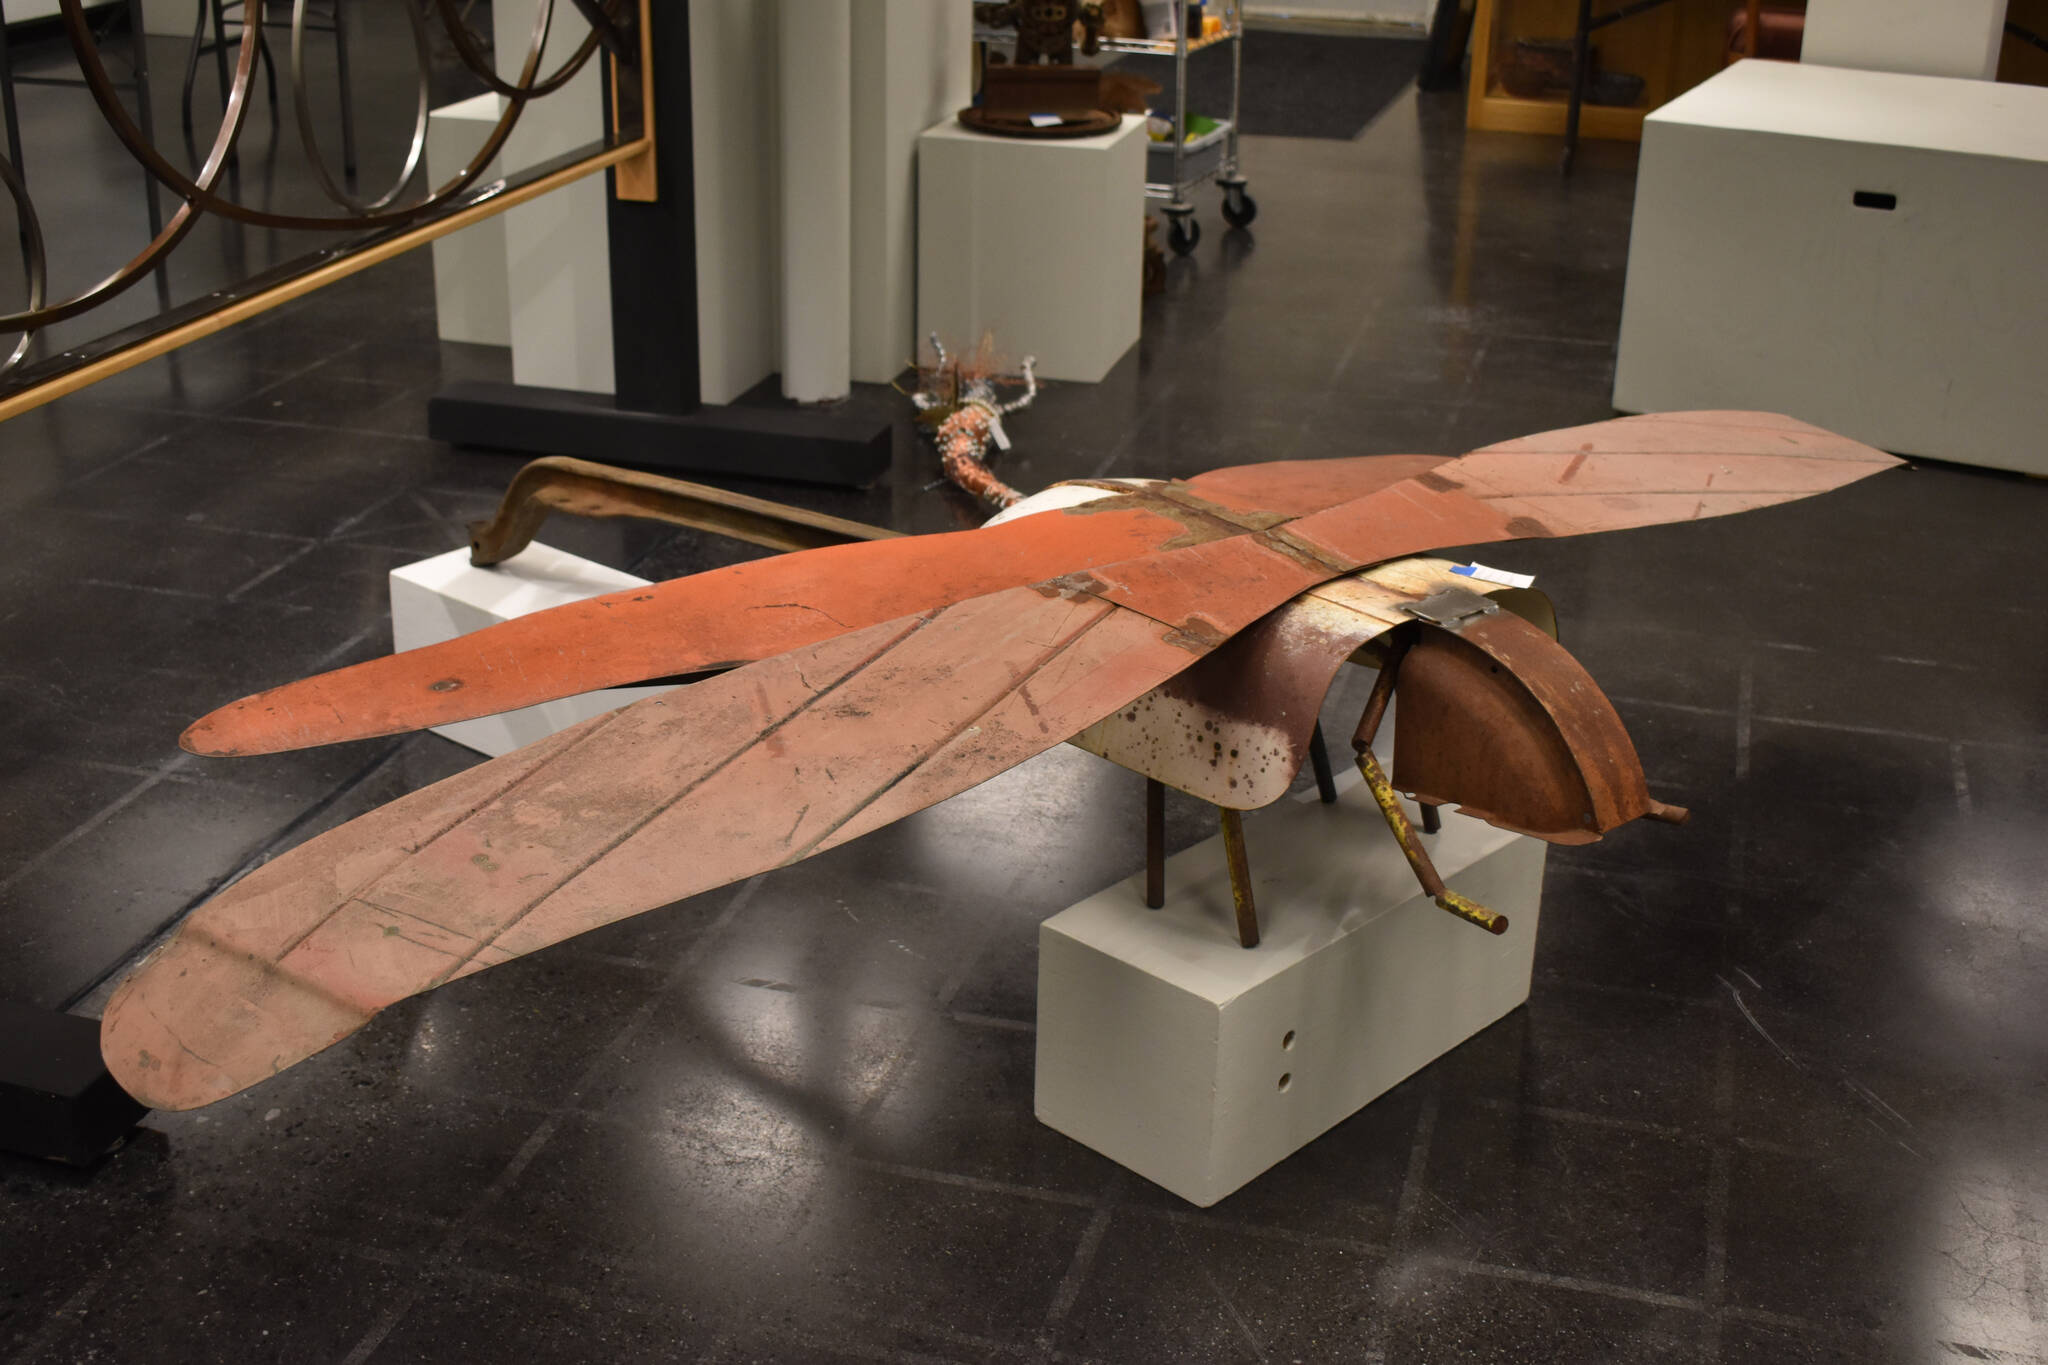 A large metal dragonfly sculpted by Jacob Nabholz commands a space on the floor Tuesday, Jan. 31, 2023, at the Kenai Art Center, in Kenai, Alaska, as part of Metalwork & Play. (Jake Dye/Peninsula Clarion)